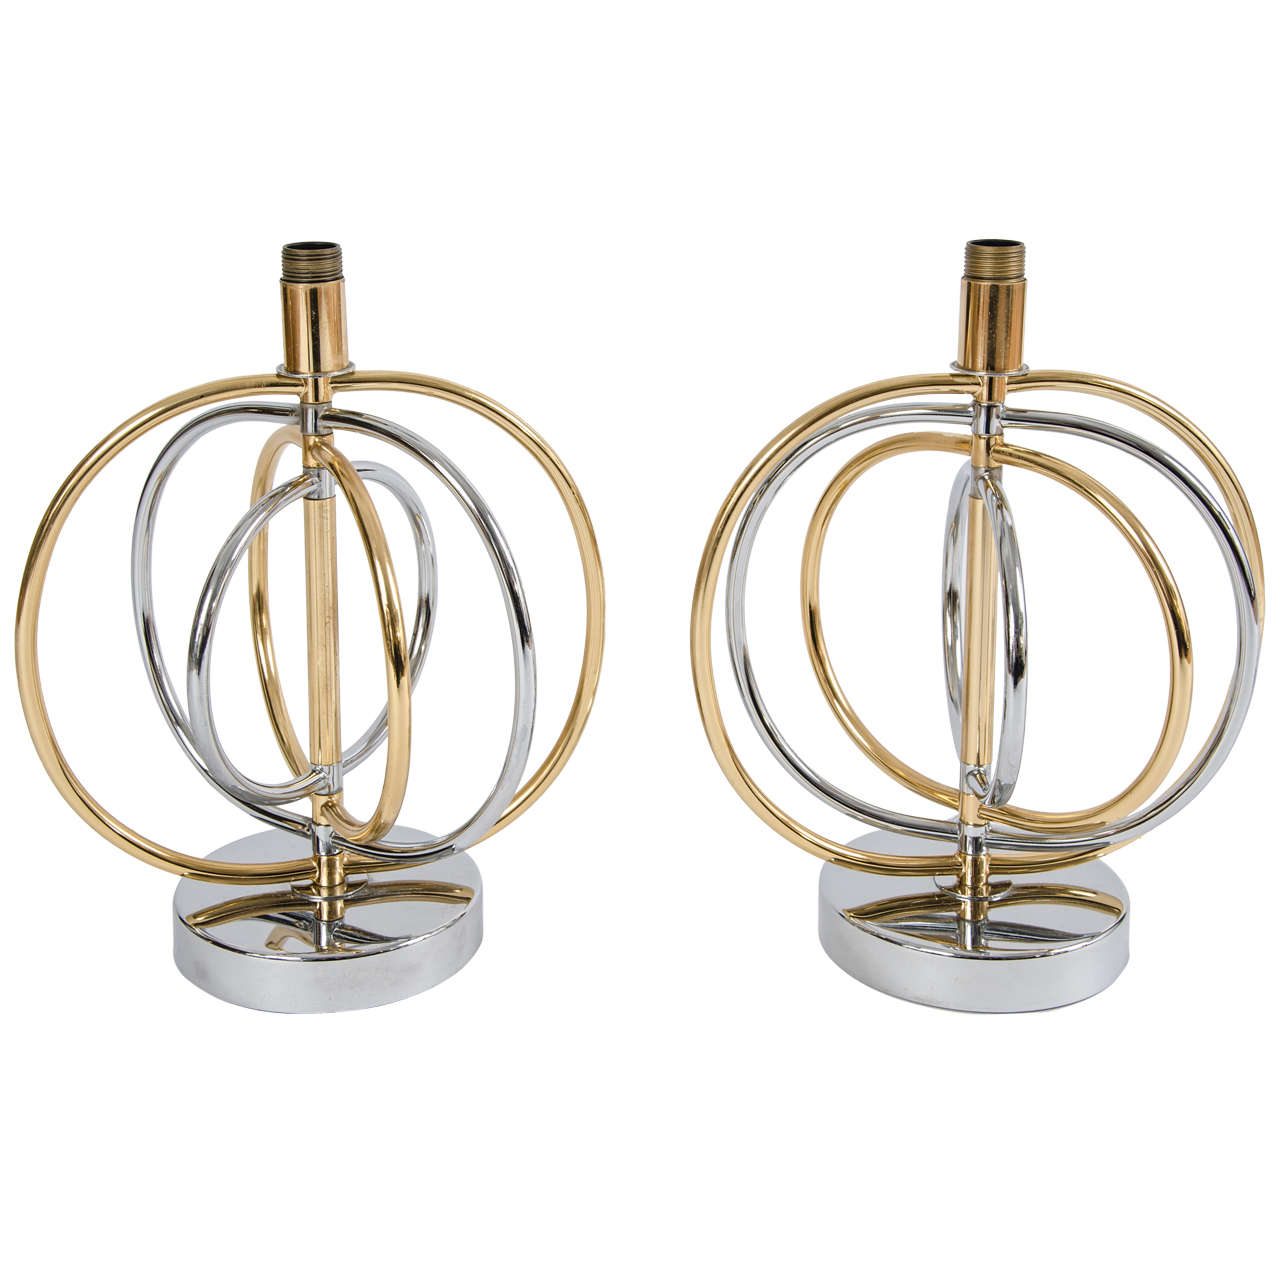 Pair of Brass and Chrome Italian Table Lamps